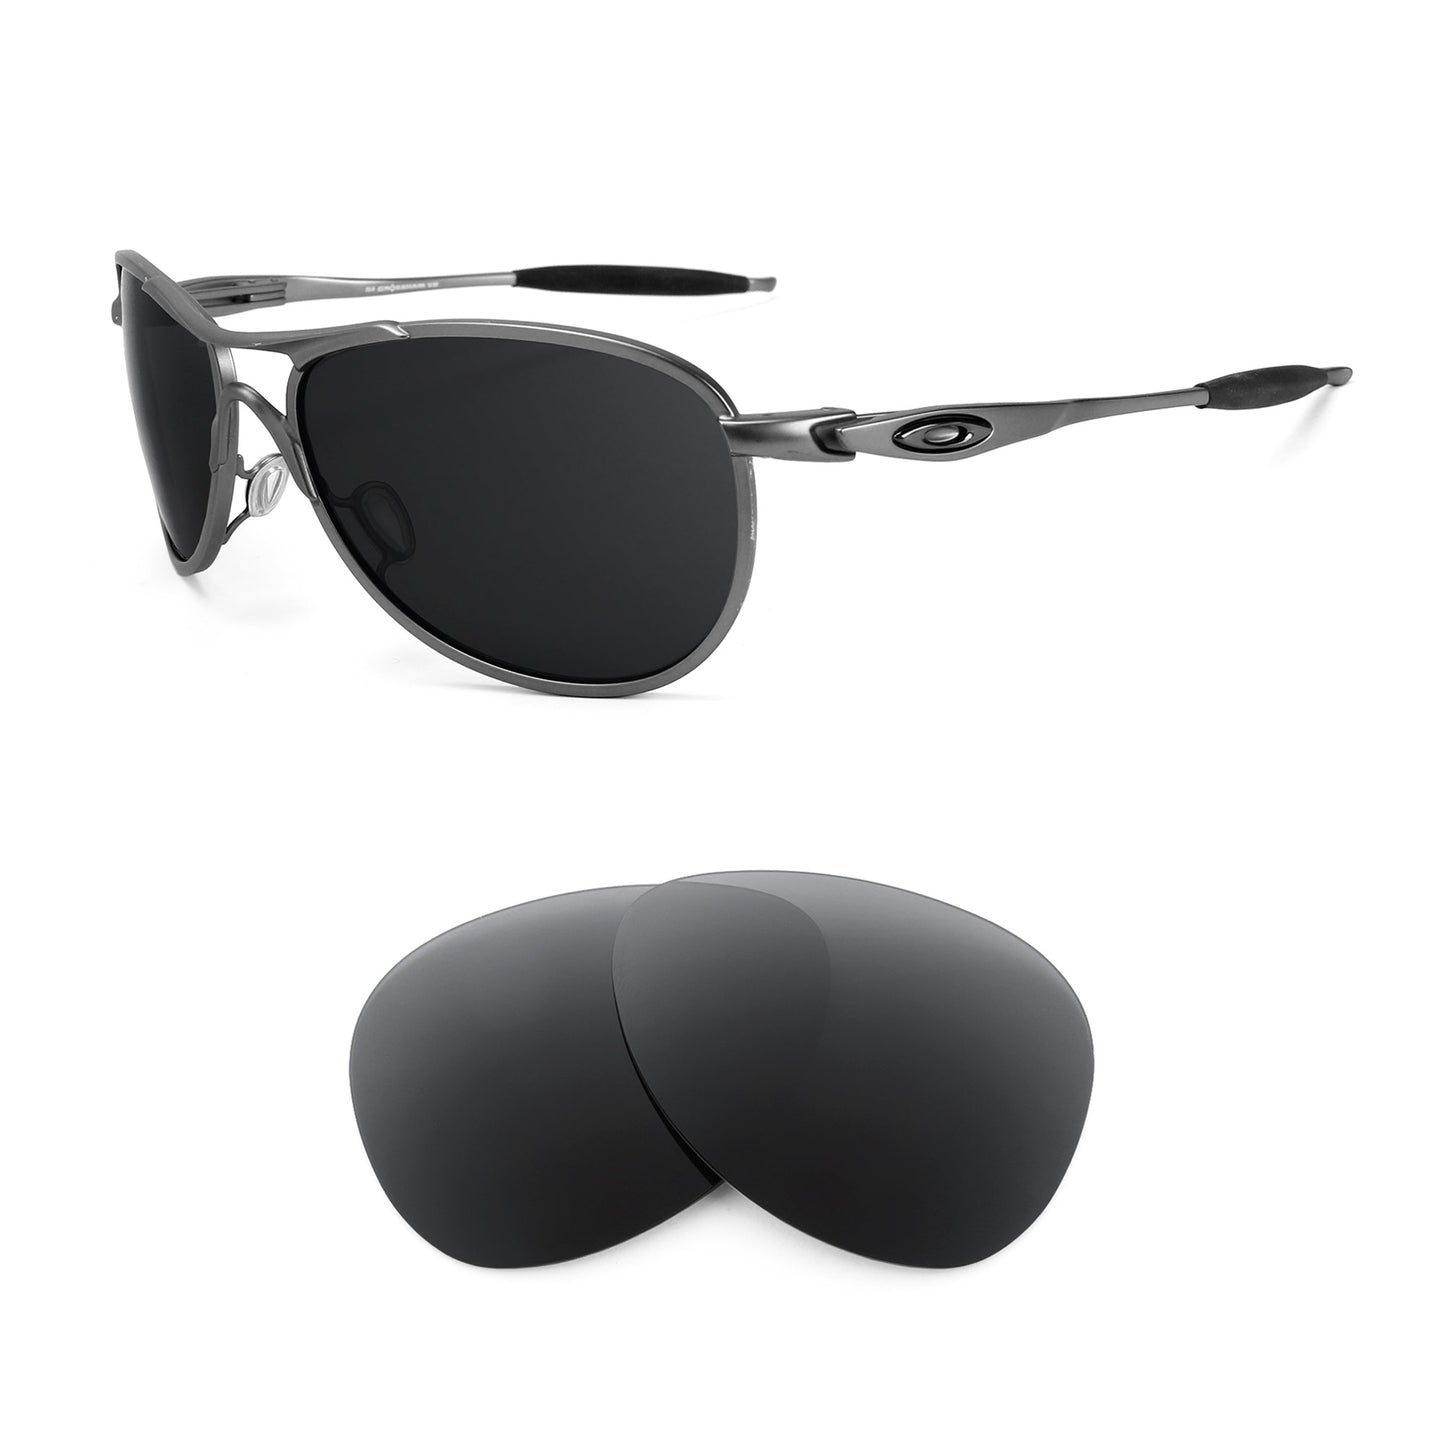 Oakley Crosshair SI Ballistic sunglasses with replacement lenses